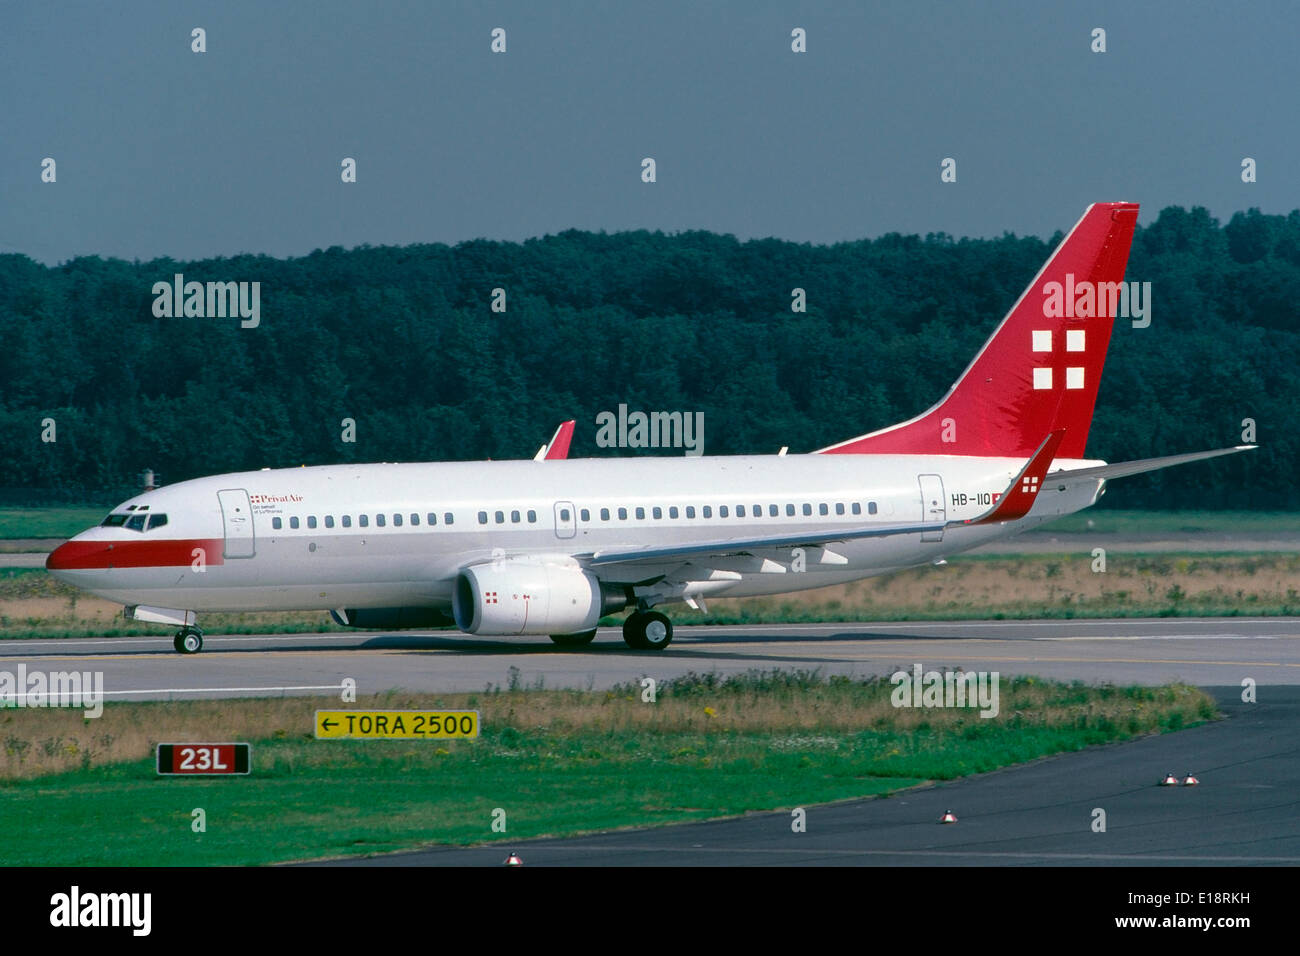 A Boeing 737-700 passenger aircraft of swiss airline PrivatAir is ready for departure at Dusseldorf-Lohausen airport, operating on behalf of german carrier Lufthansa. Stock Photo